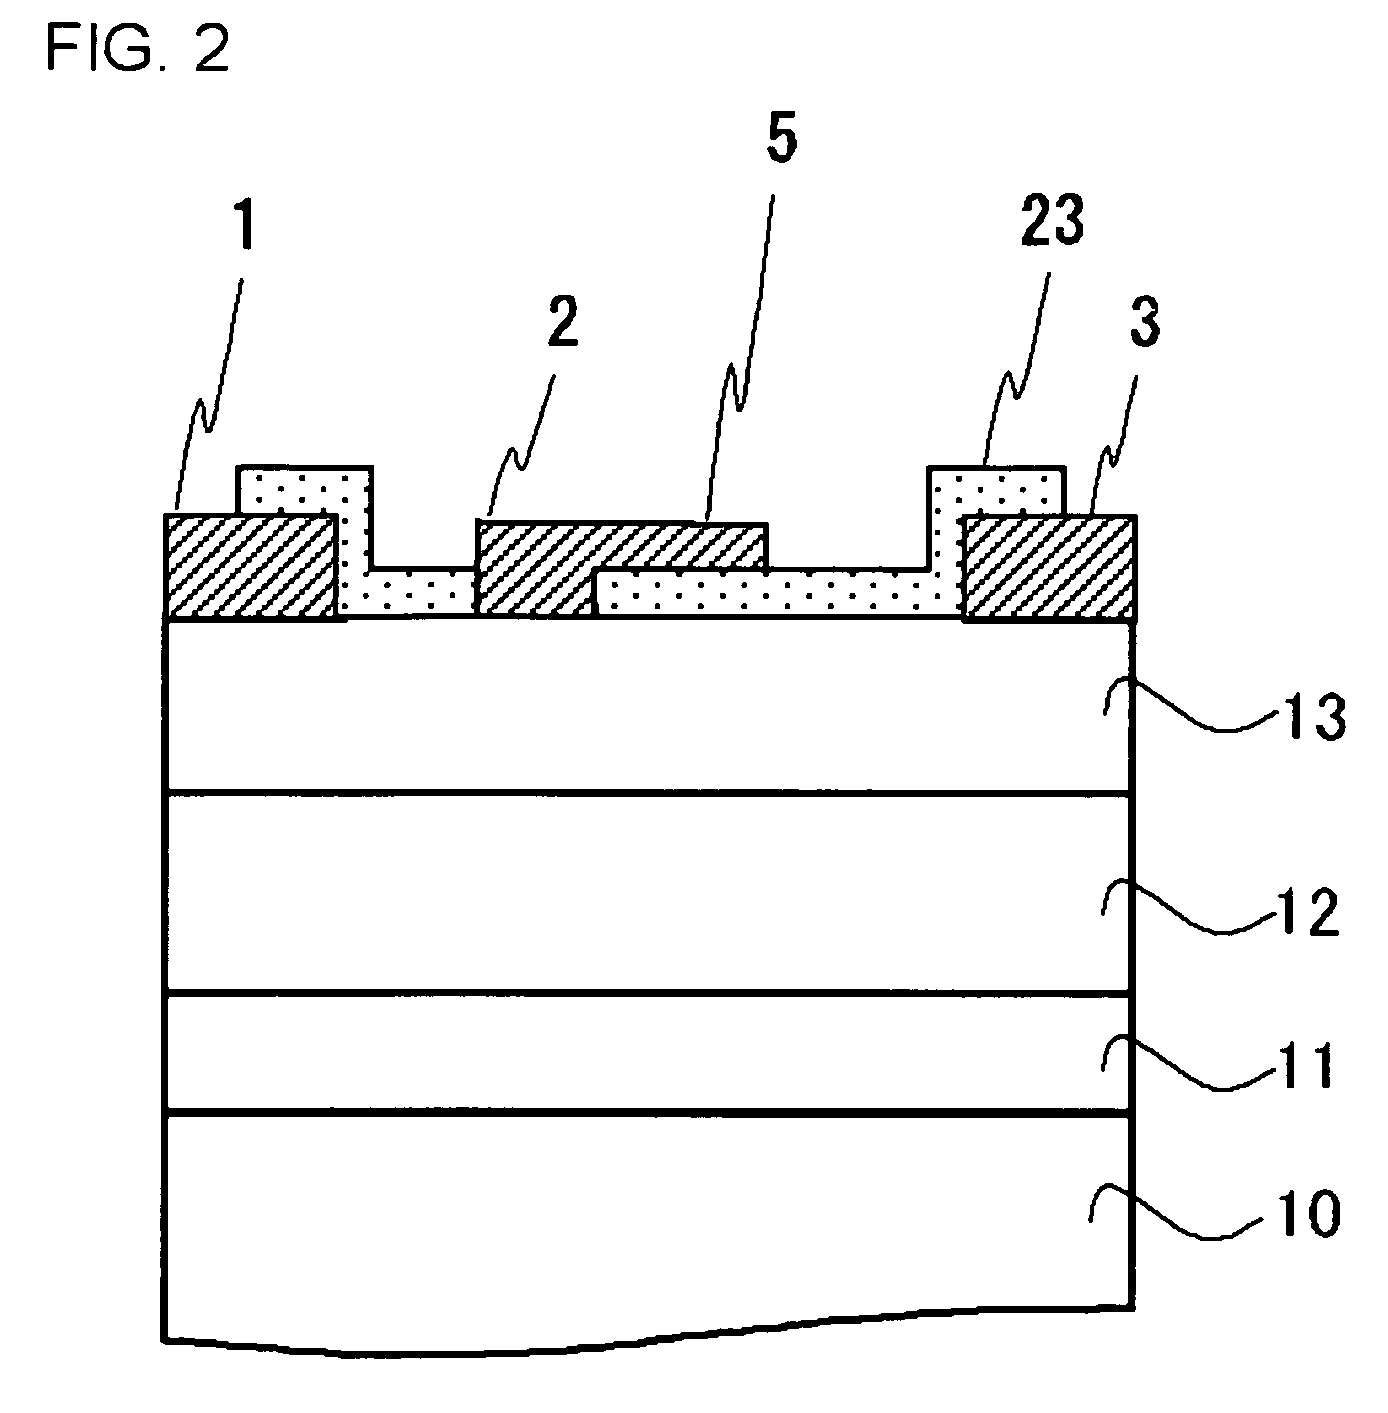 Field-effect transistor having group III nitride electrode structure